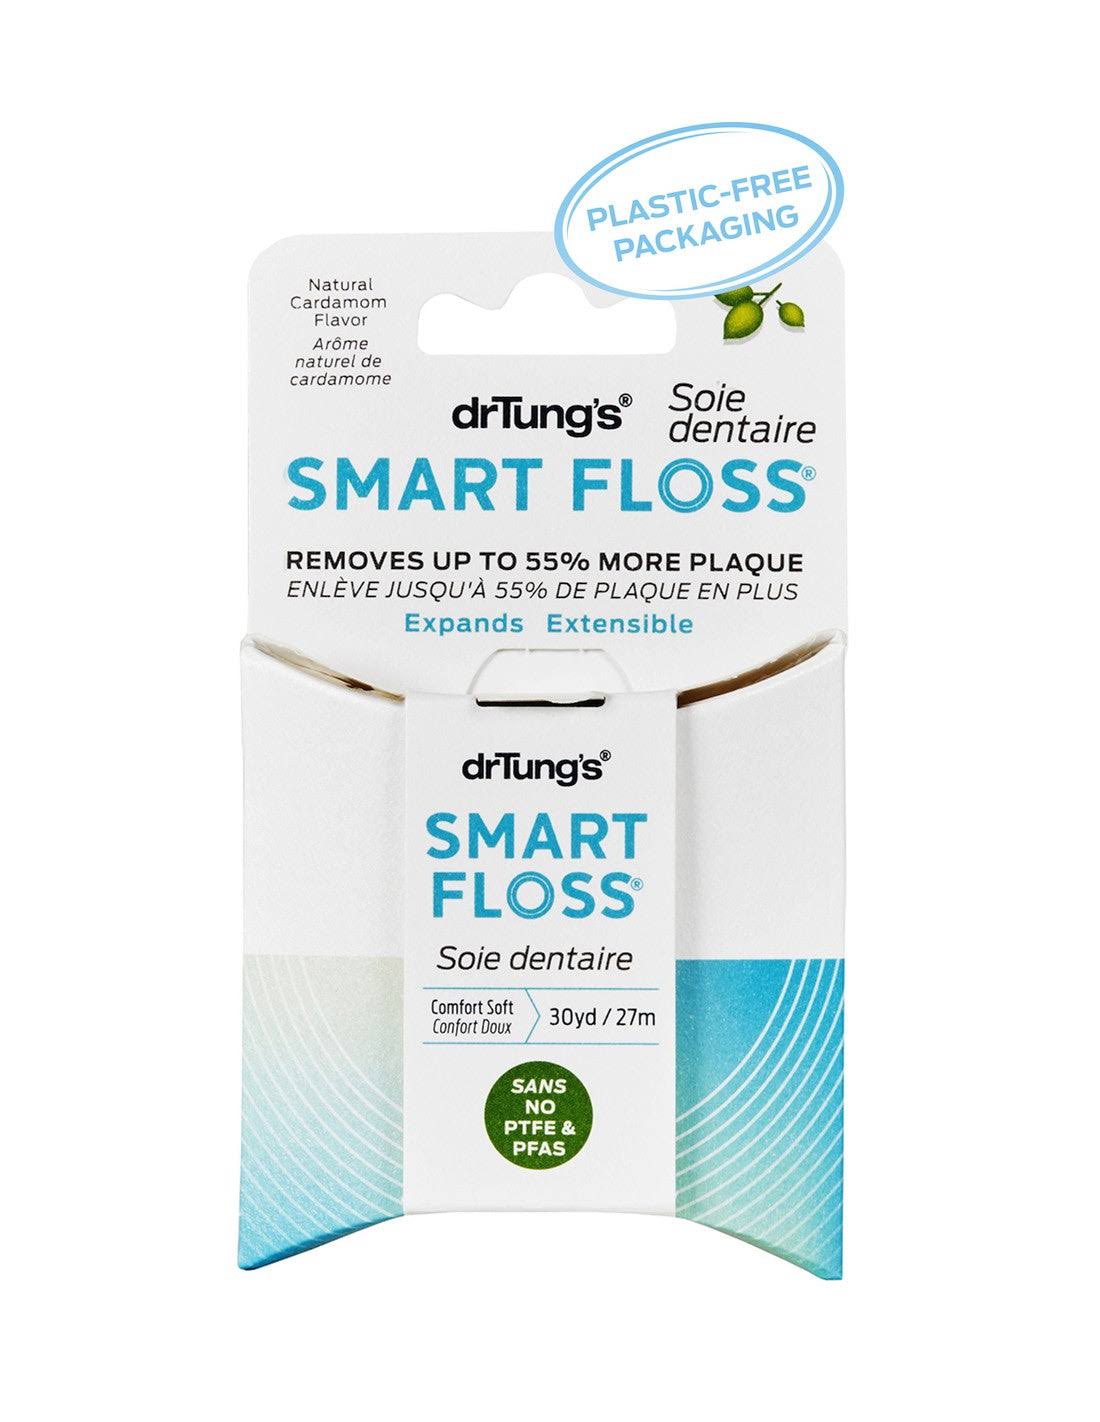 Dr. Tung's Smart Floss Natural Cardamom/Assorted Colors 6 Count